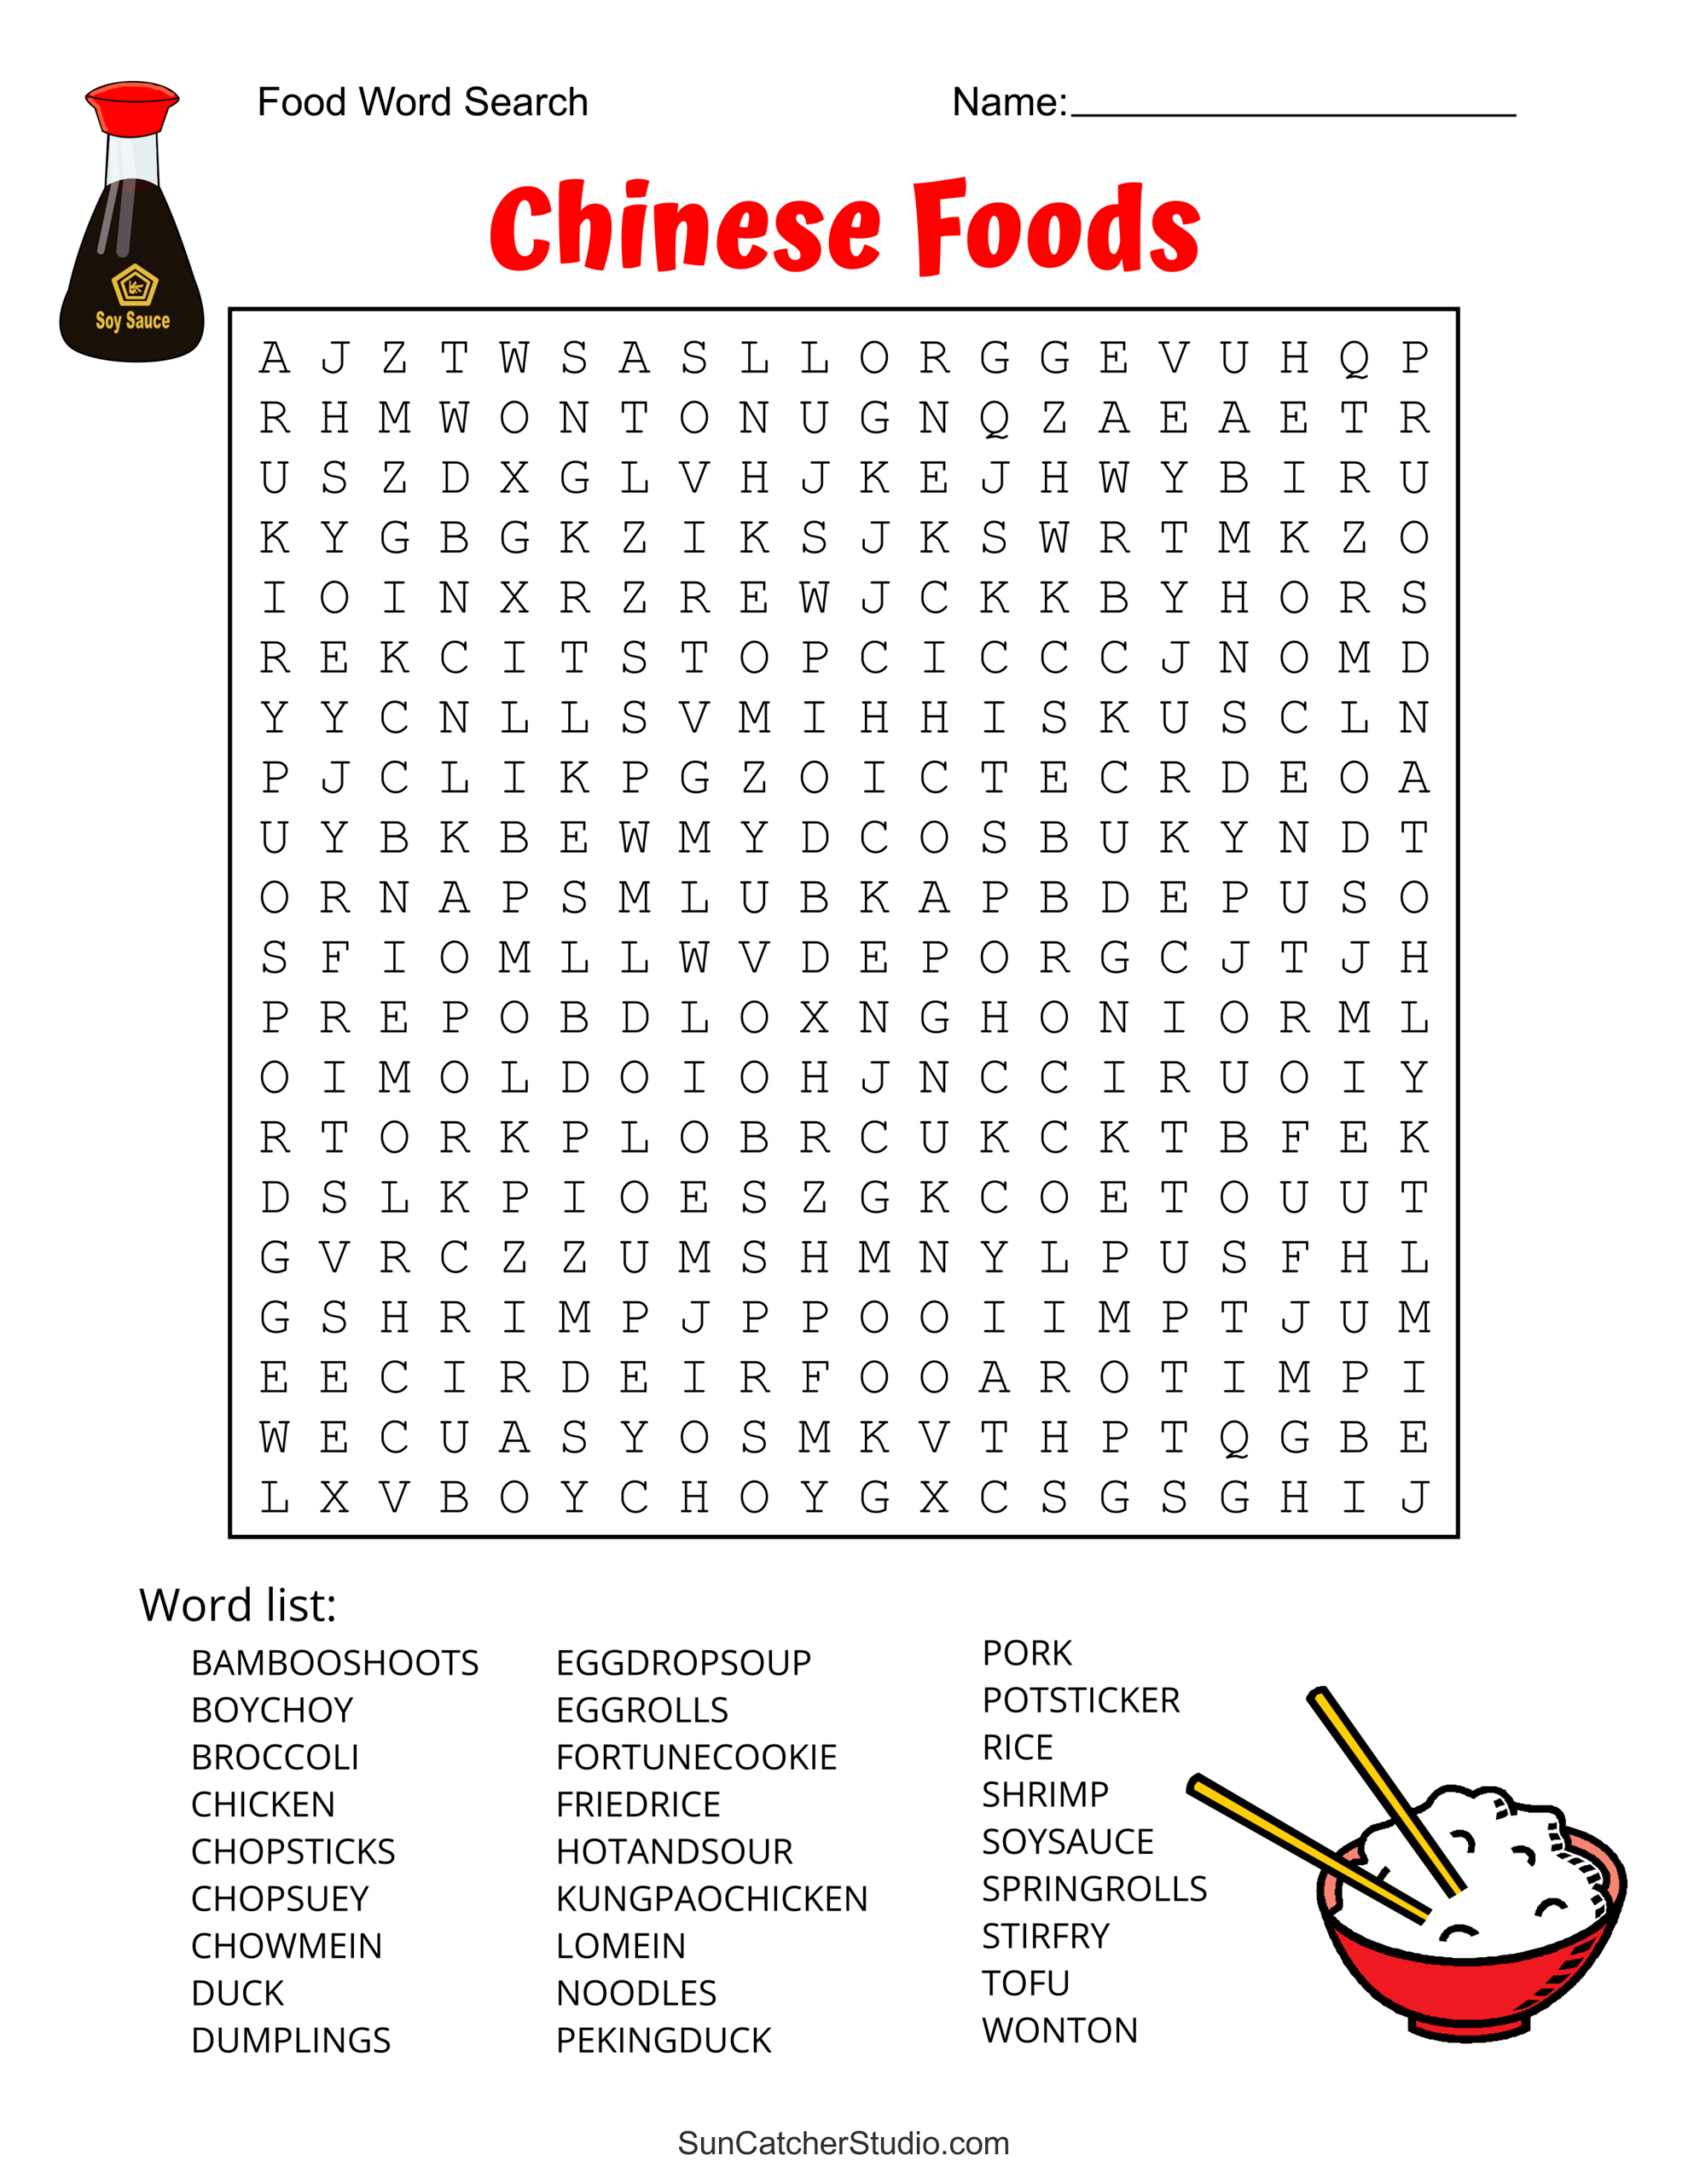 Food Word Search (Free Printable Puzzles) – Diy Projects, Patterns - Free Printable Word Search Puzzles For Middle School Students